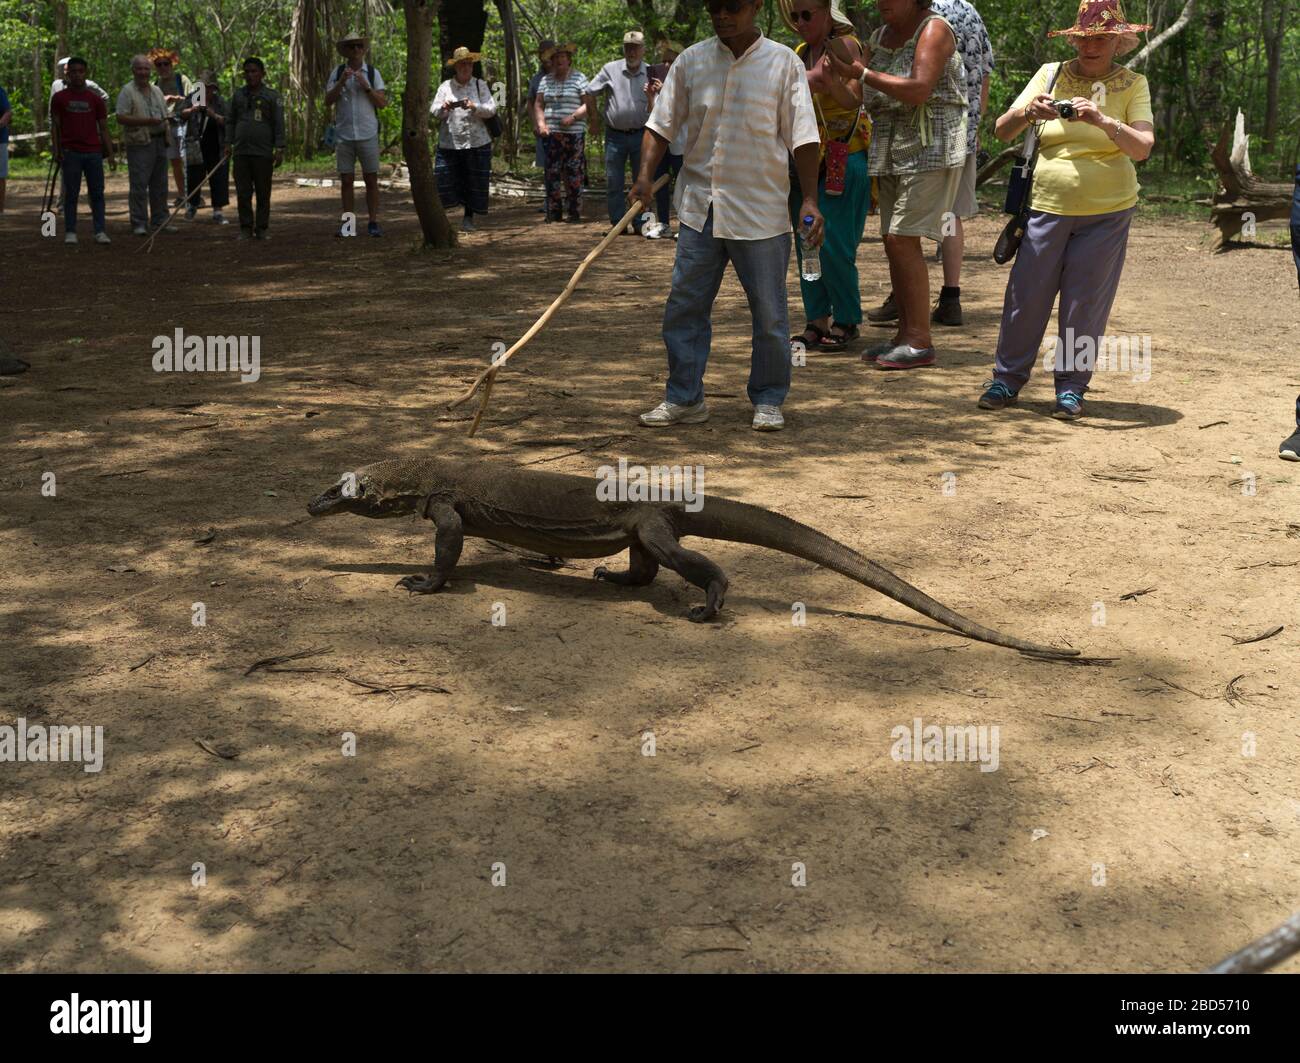 dh Tamarind Forest dragons KOMODO ISLAND INDONESIA Group of tourists viewing young Komodo dragon UNESCO World Heritage site national tourist park Stock Photo